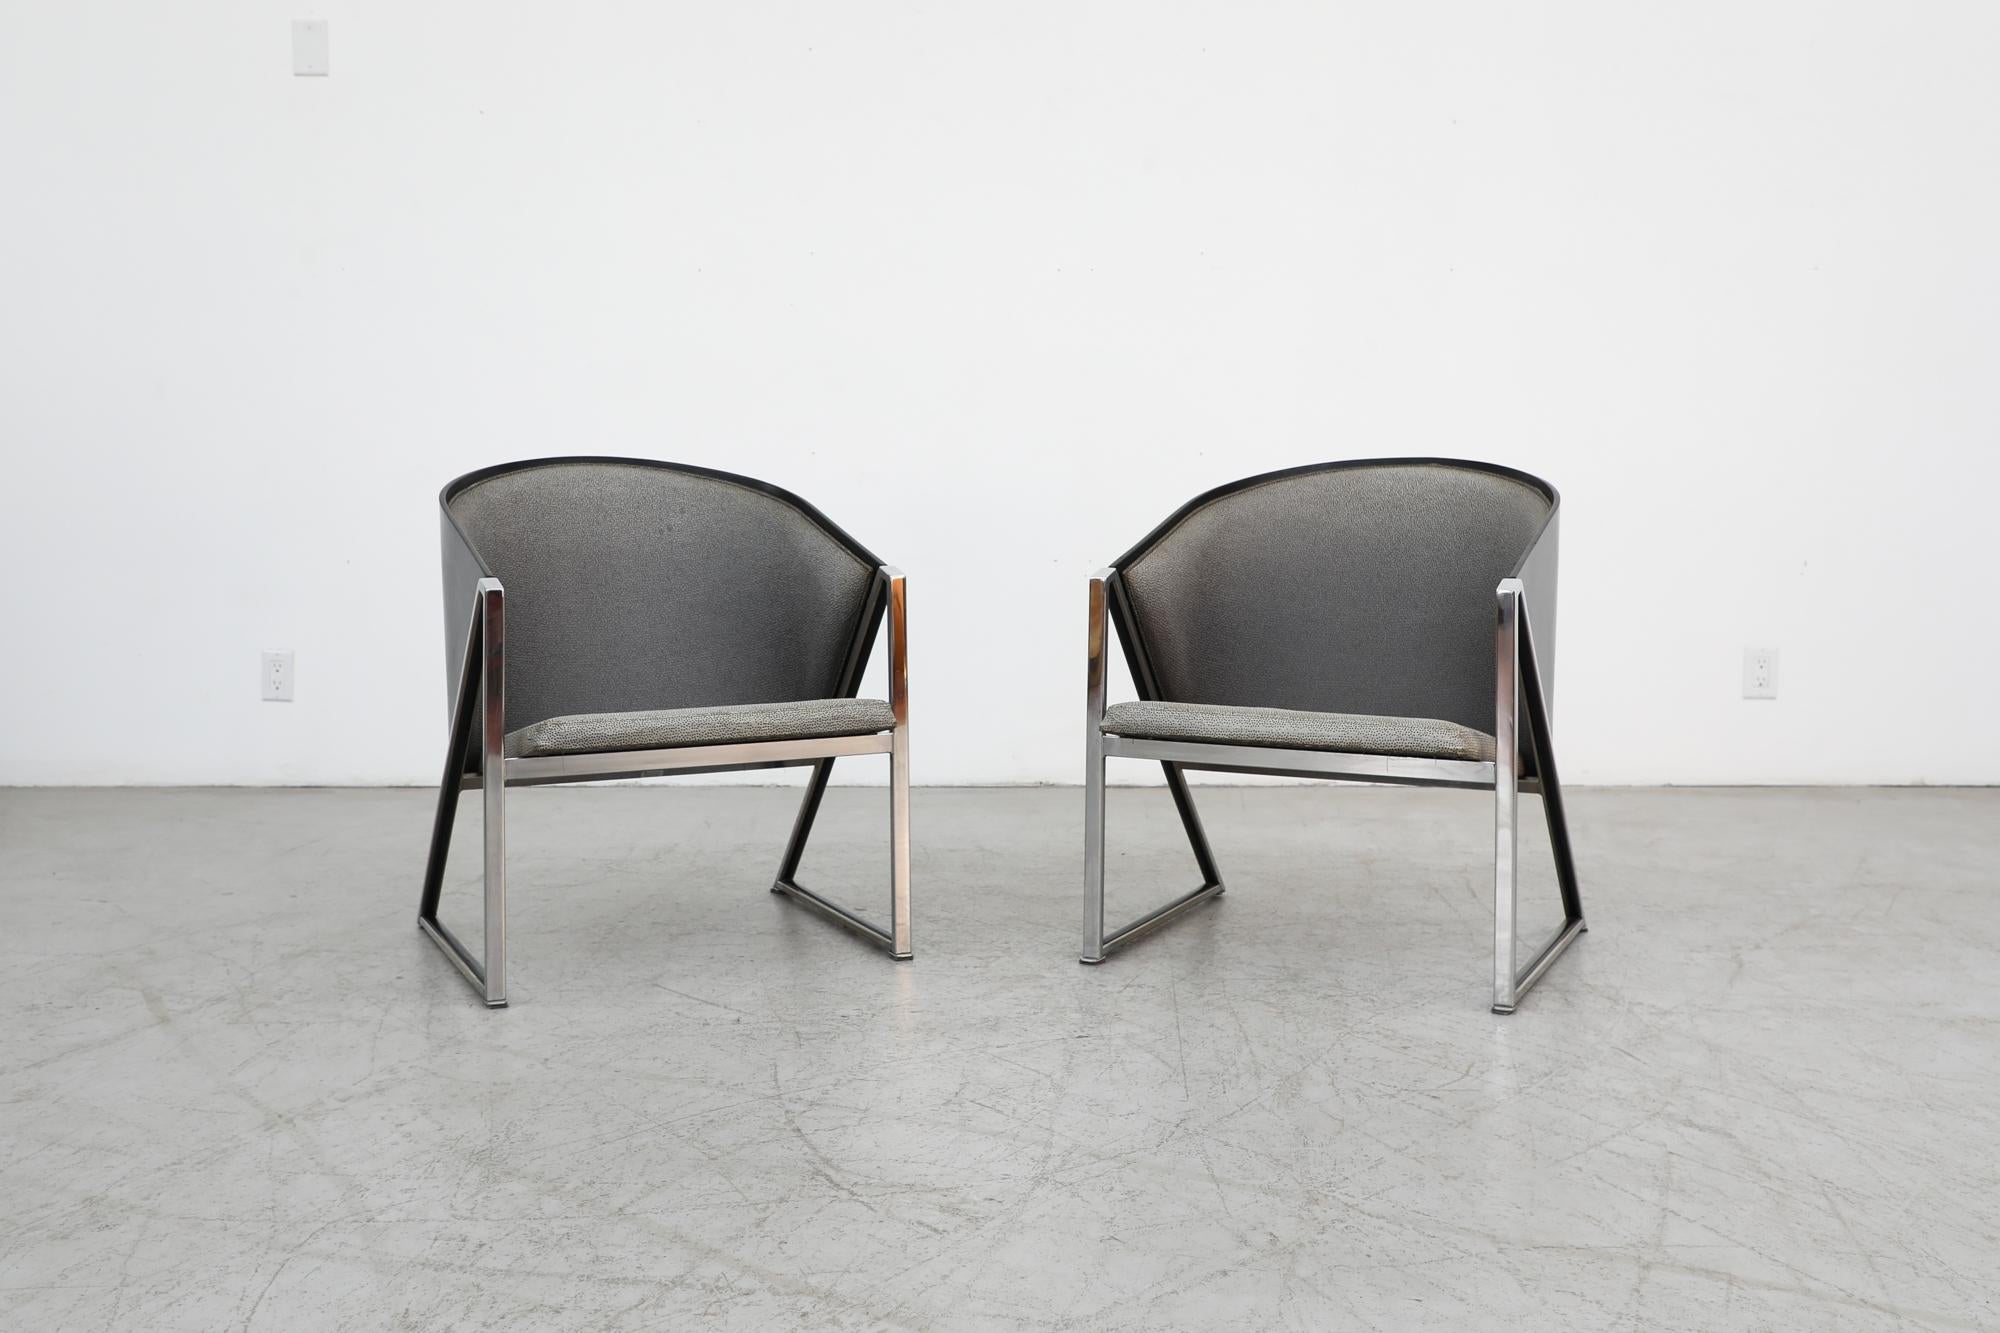 Pair of 'Mondi Soft' armchairs designed by Finnish architect Jouko Jarvisalo for Inno Interior OY, 1980s. These chairs have a black lacquered shell with chrome frame and original grey upholstery. The upholstery is in VERY worn condition and